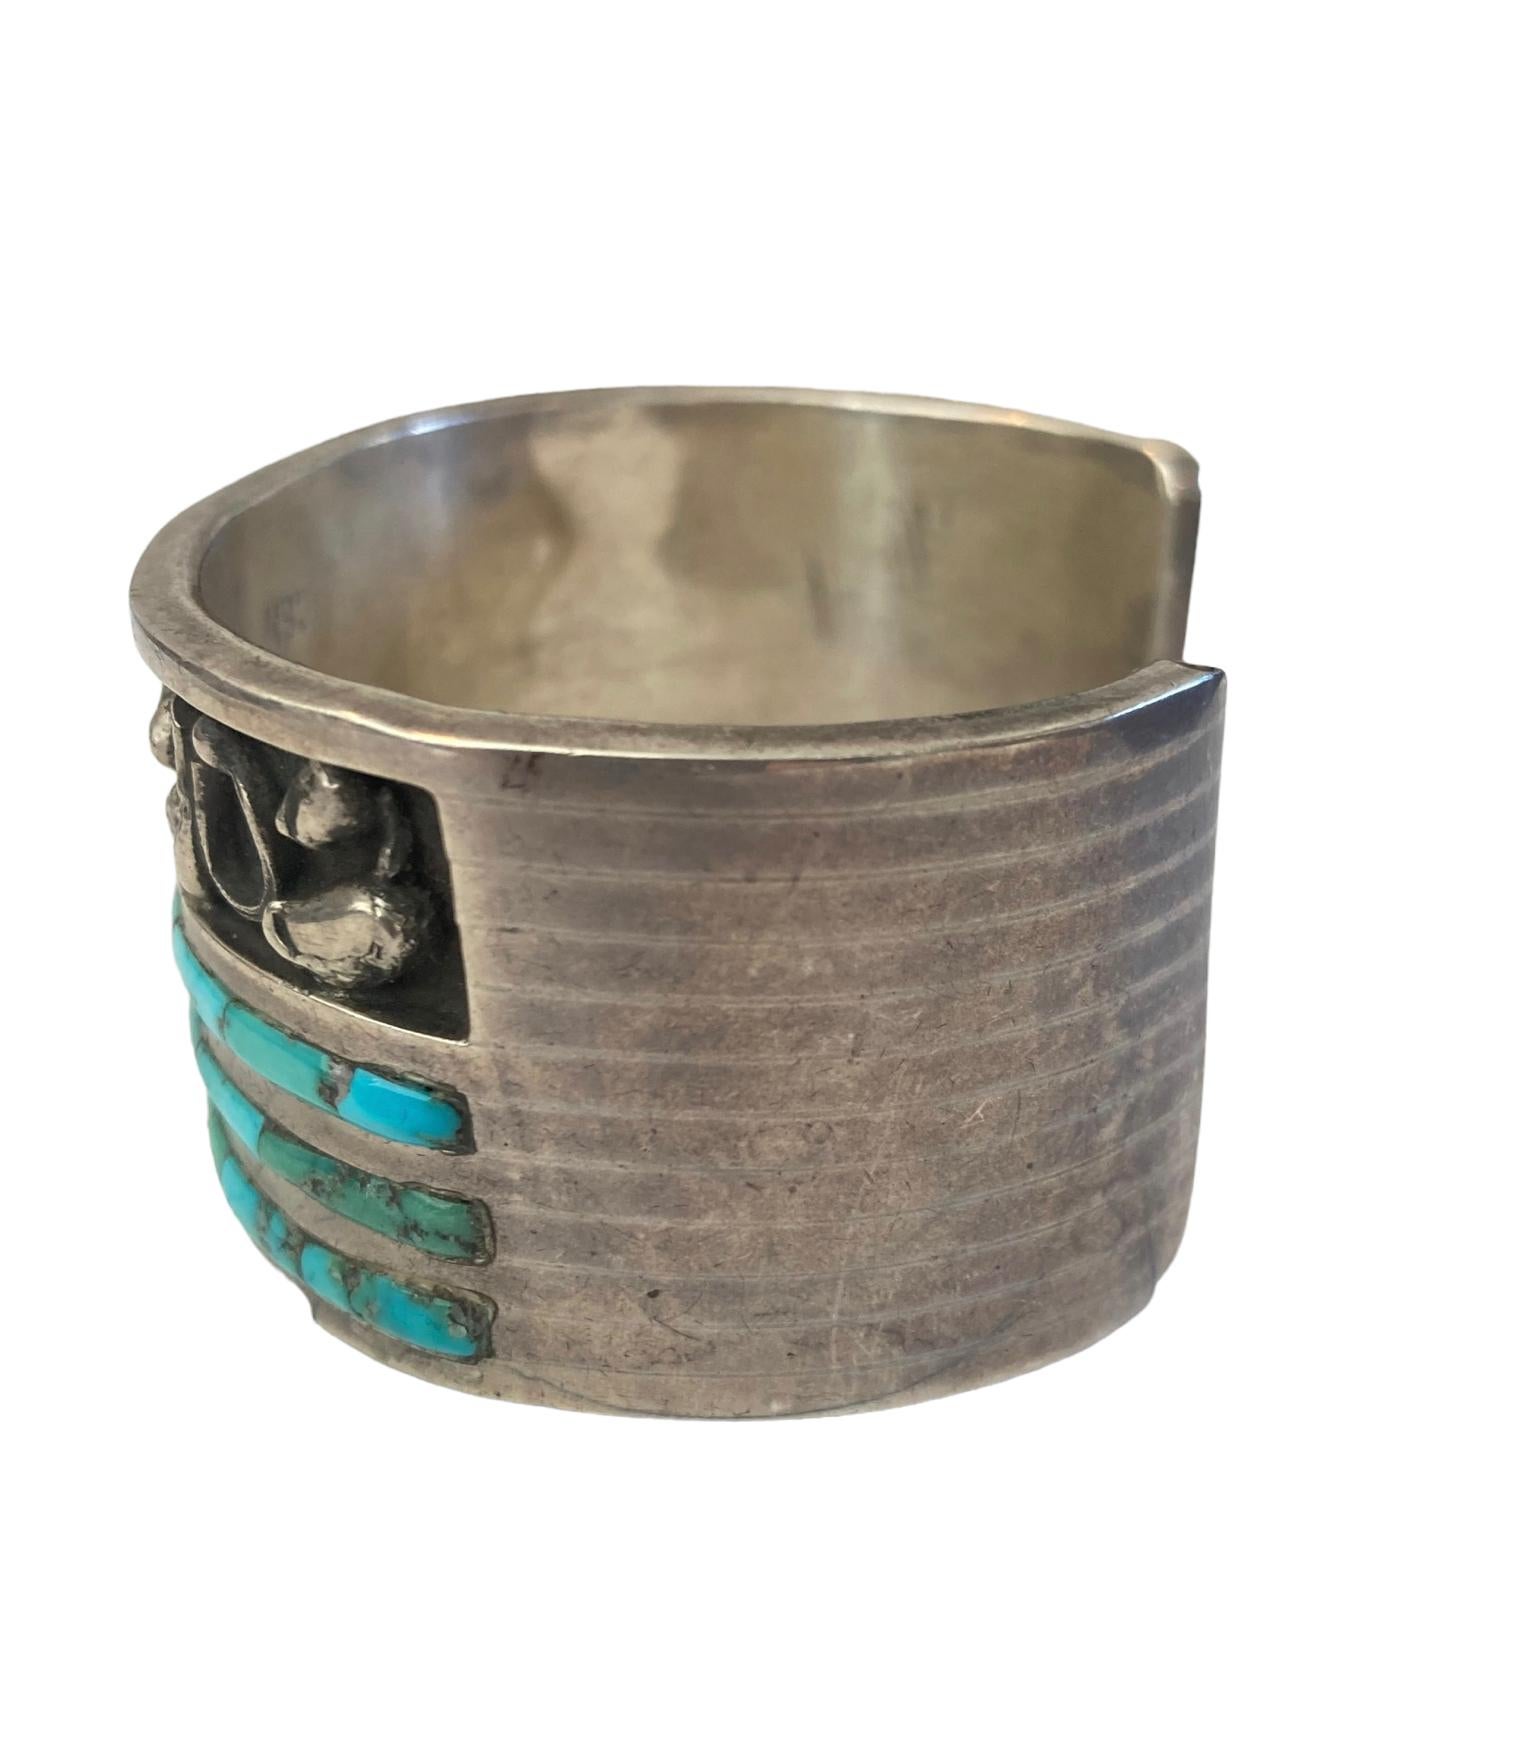 This Arresting Zuni Chester B Mahooty Sterling Silver and Turquoise Cuff Bracelet will stop you in your tracks. The turquoise inlay set between thick bands of sterling with an abstract sterling silver design above it is gorgeous. The bracelet is